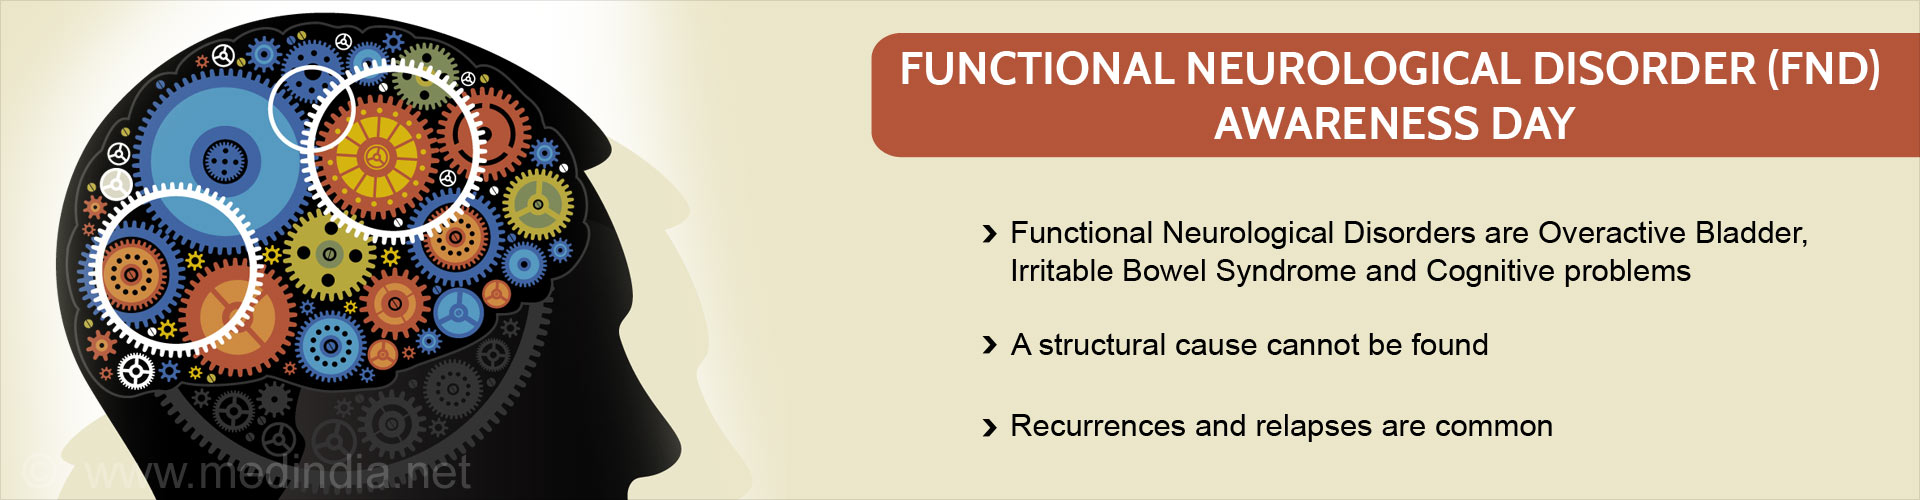 Functional neurological disorder (FND) Awareness Day
- Functional neurological disorder are overactive bladder, irritable bowel syndrome and cognitive problems
- A structural cause cannot be found
- Recurrences are relapses are common